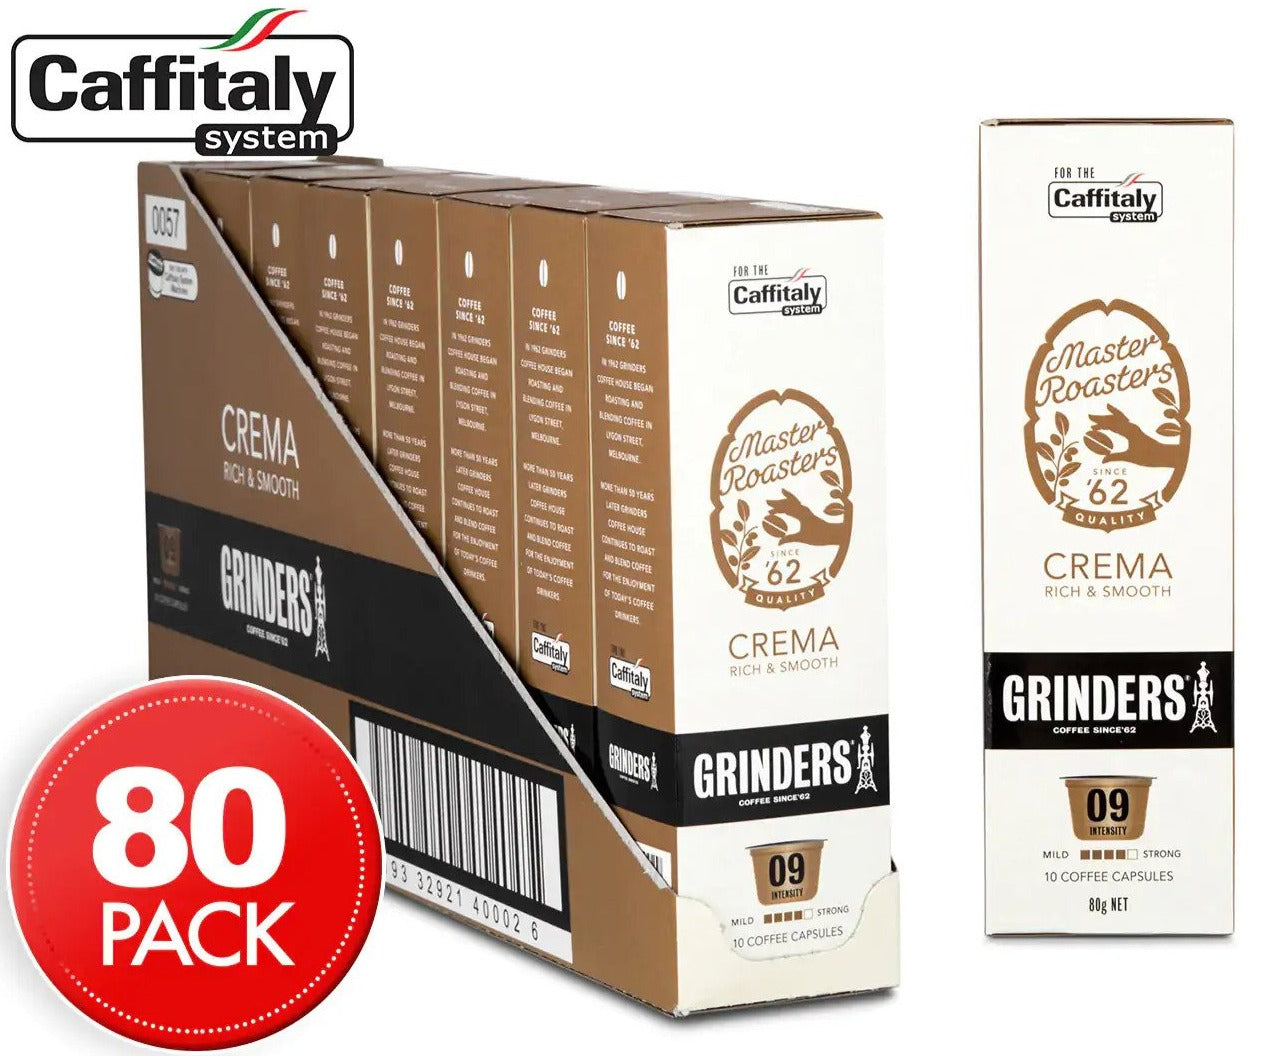 8 x Grinders Crema Caffitaly Coffee Capsules 10pk